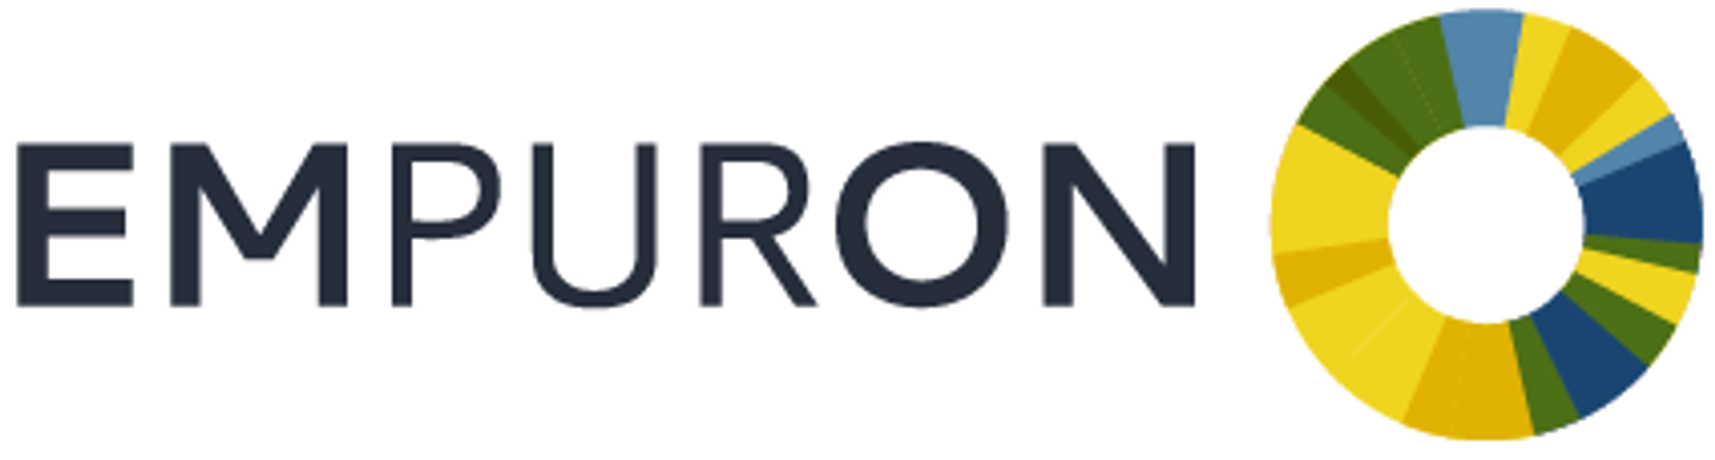 EMPURON - Decentralized Power Plants - Monitoring & Reporting Software